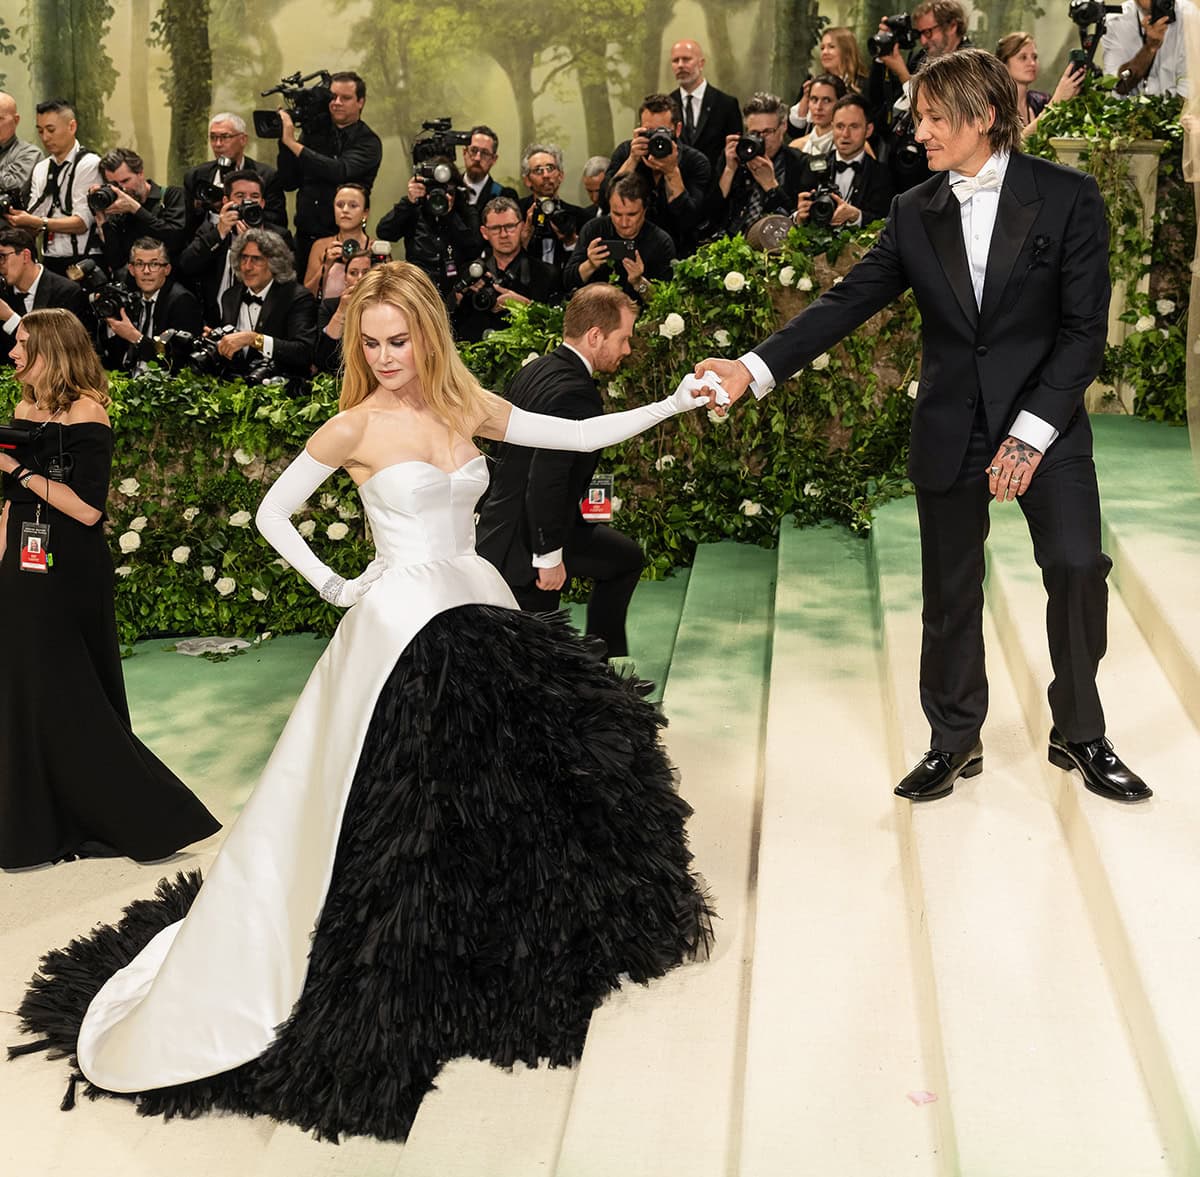 As they ascend the Met Gala stairs wearing matching black-and-white ensembles, Nicole Kidman appears like a princess being assisted by her prince charming husband Keith Urban